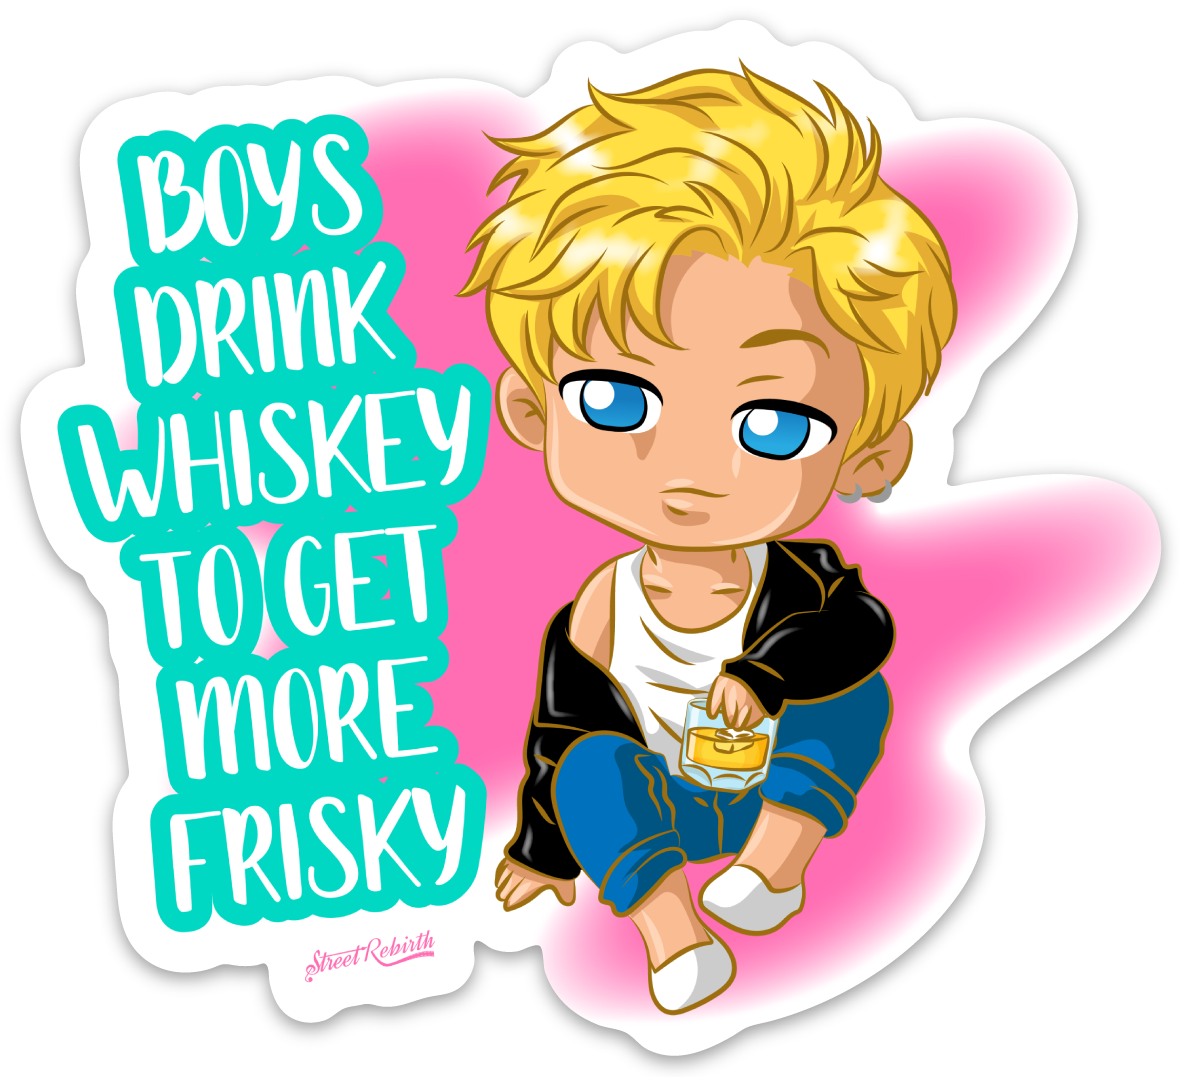 BOYS DRINK WHISKEY TO GET MORE FRISKY PUN STICKER – ONE 4 INCH WATER PROOF VINYL STICKER – FOR HYDRO FLASK, SKATEBOARD, LAPTOP, PLANNER, CAR, COLLECTING, GIFTING